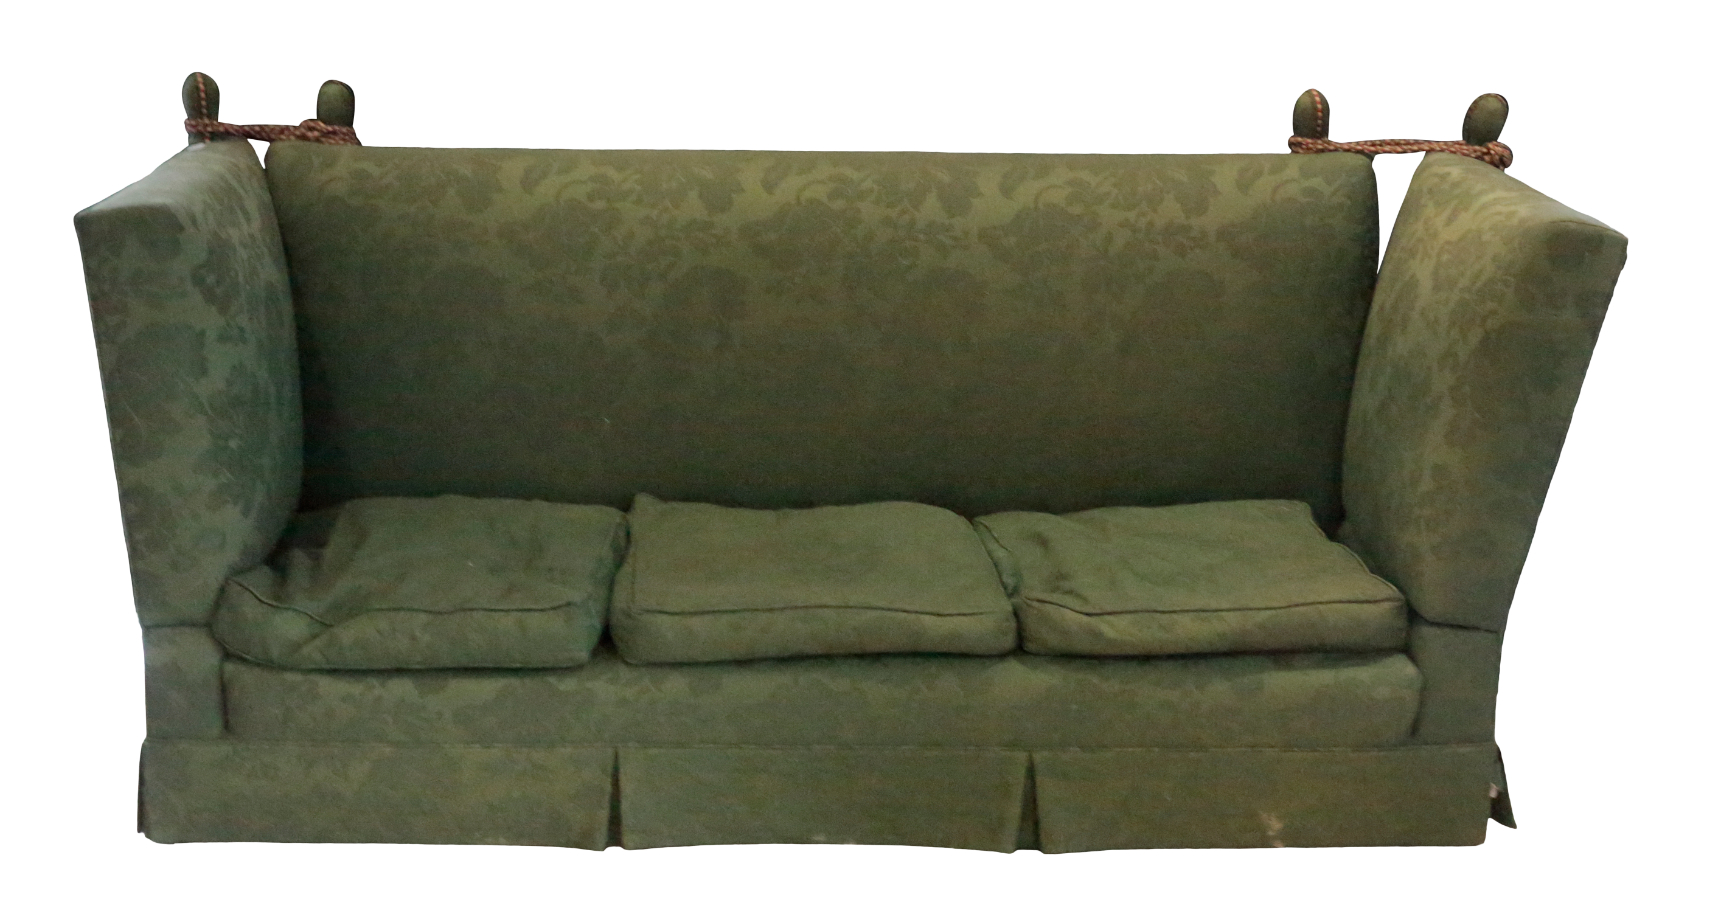 A KNOLE SOFA with green damask